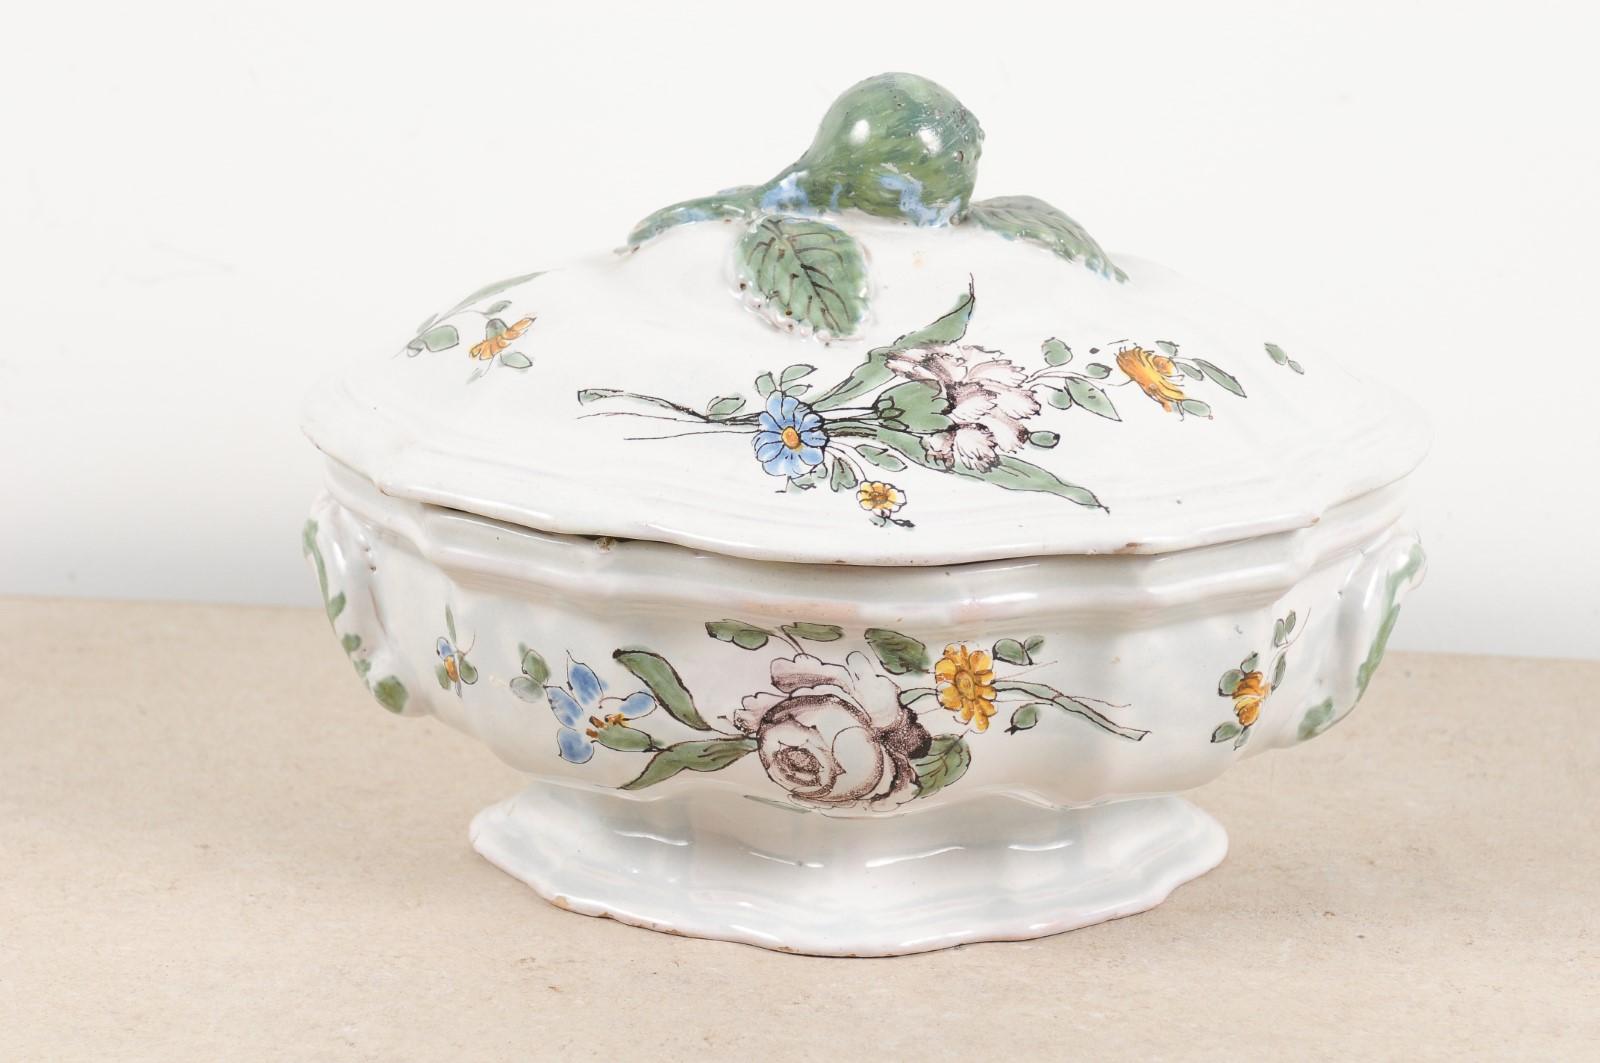 French 1750s Faience Oval Shaped Soup Tureen from Bordeaux with Floral Decor 1